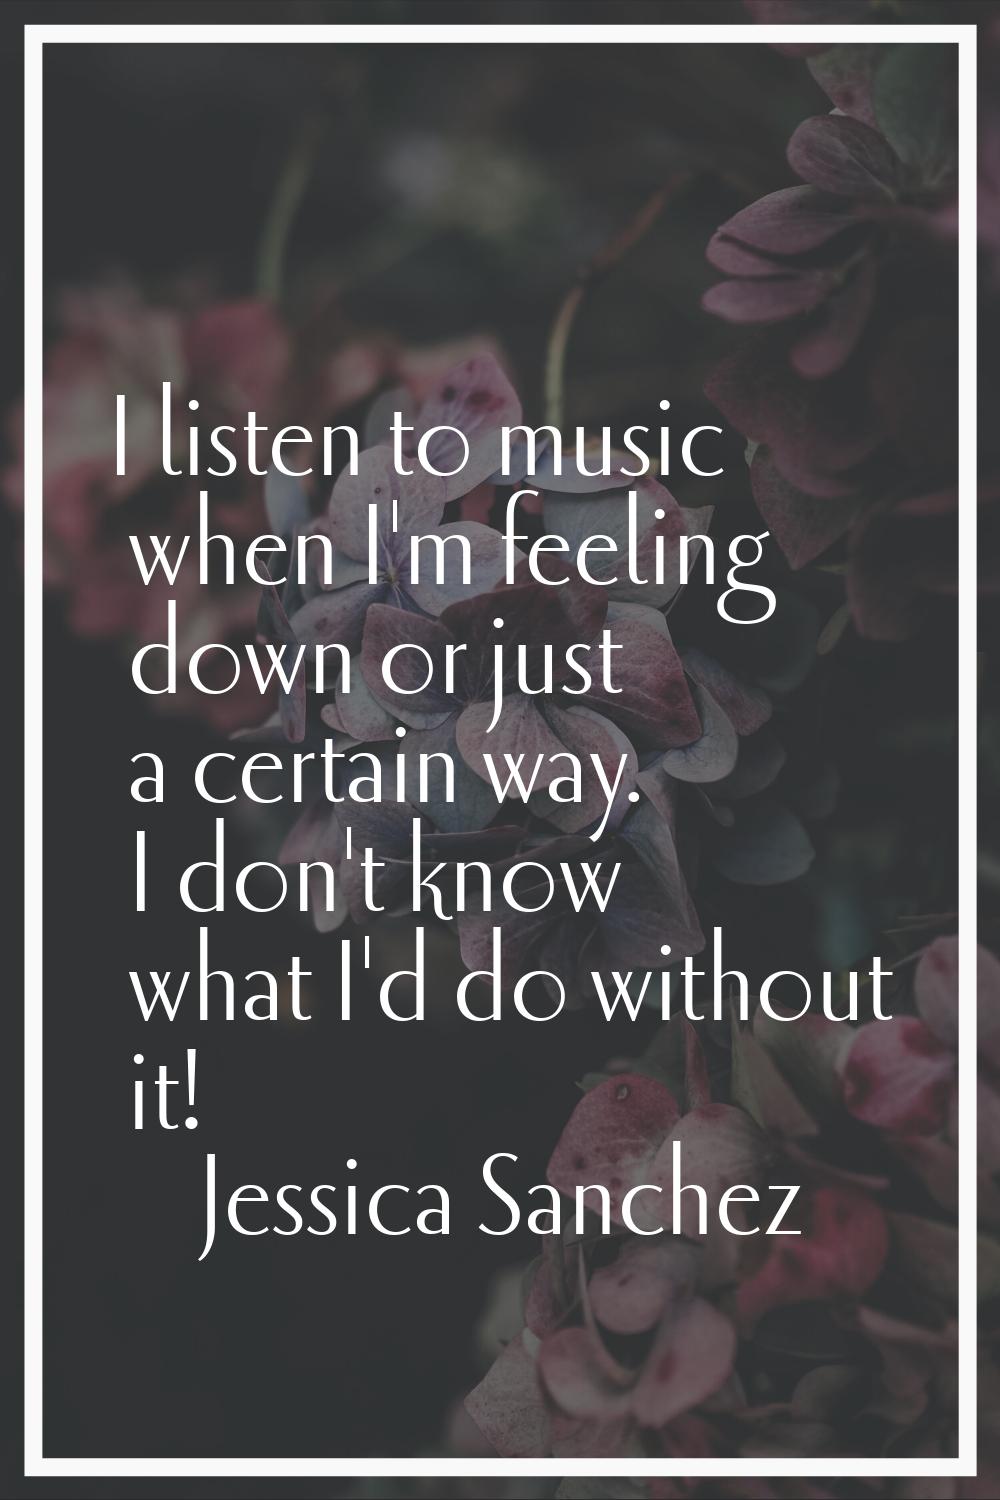 I listen to music when I'm feeling down or just a certain way. I don't know what I'd do without it!